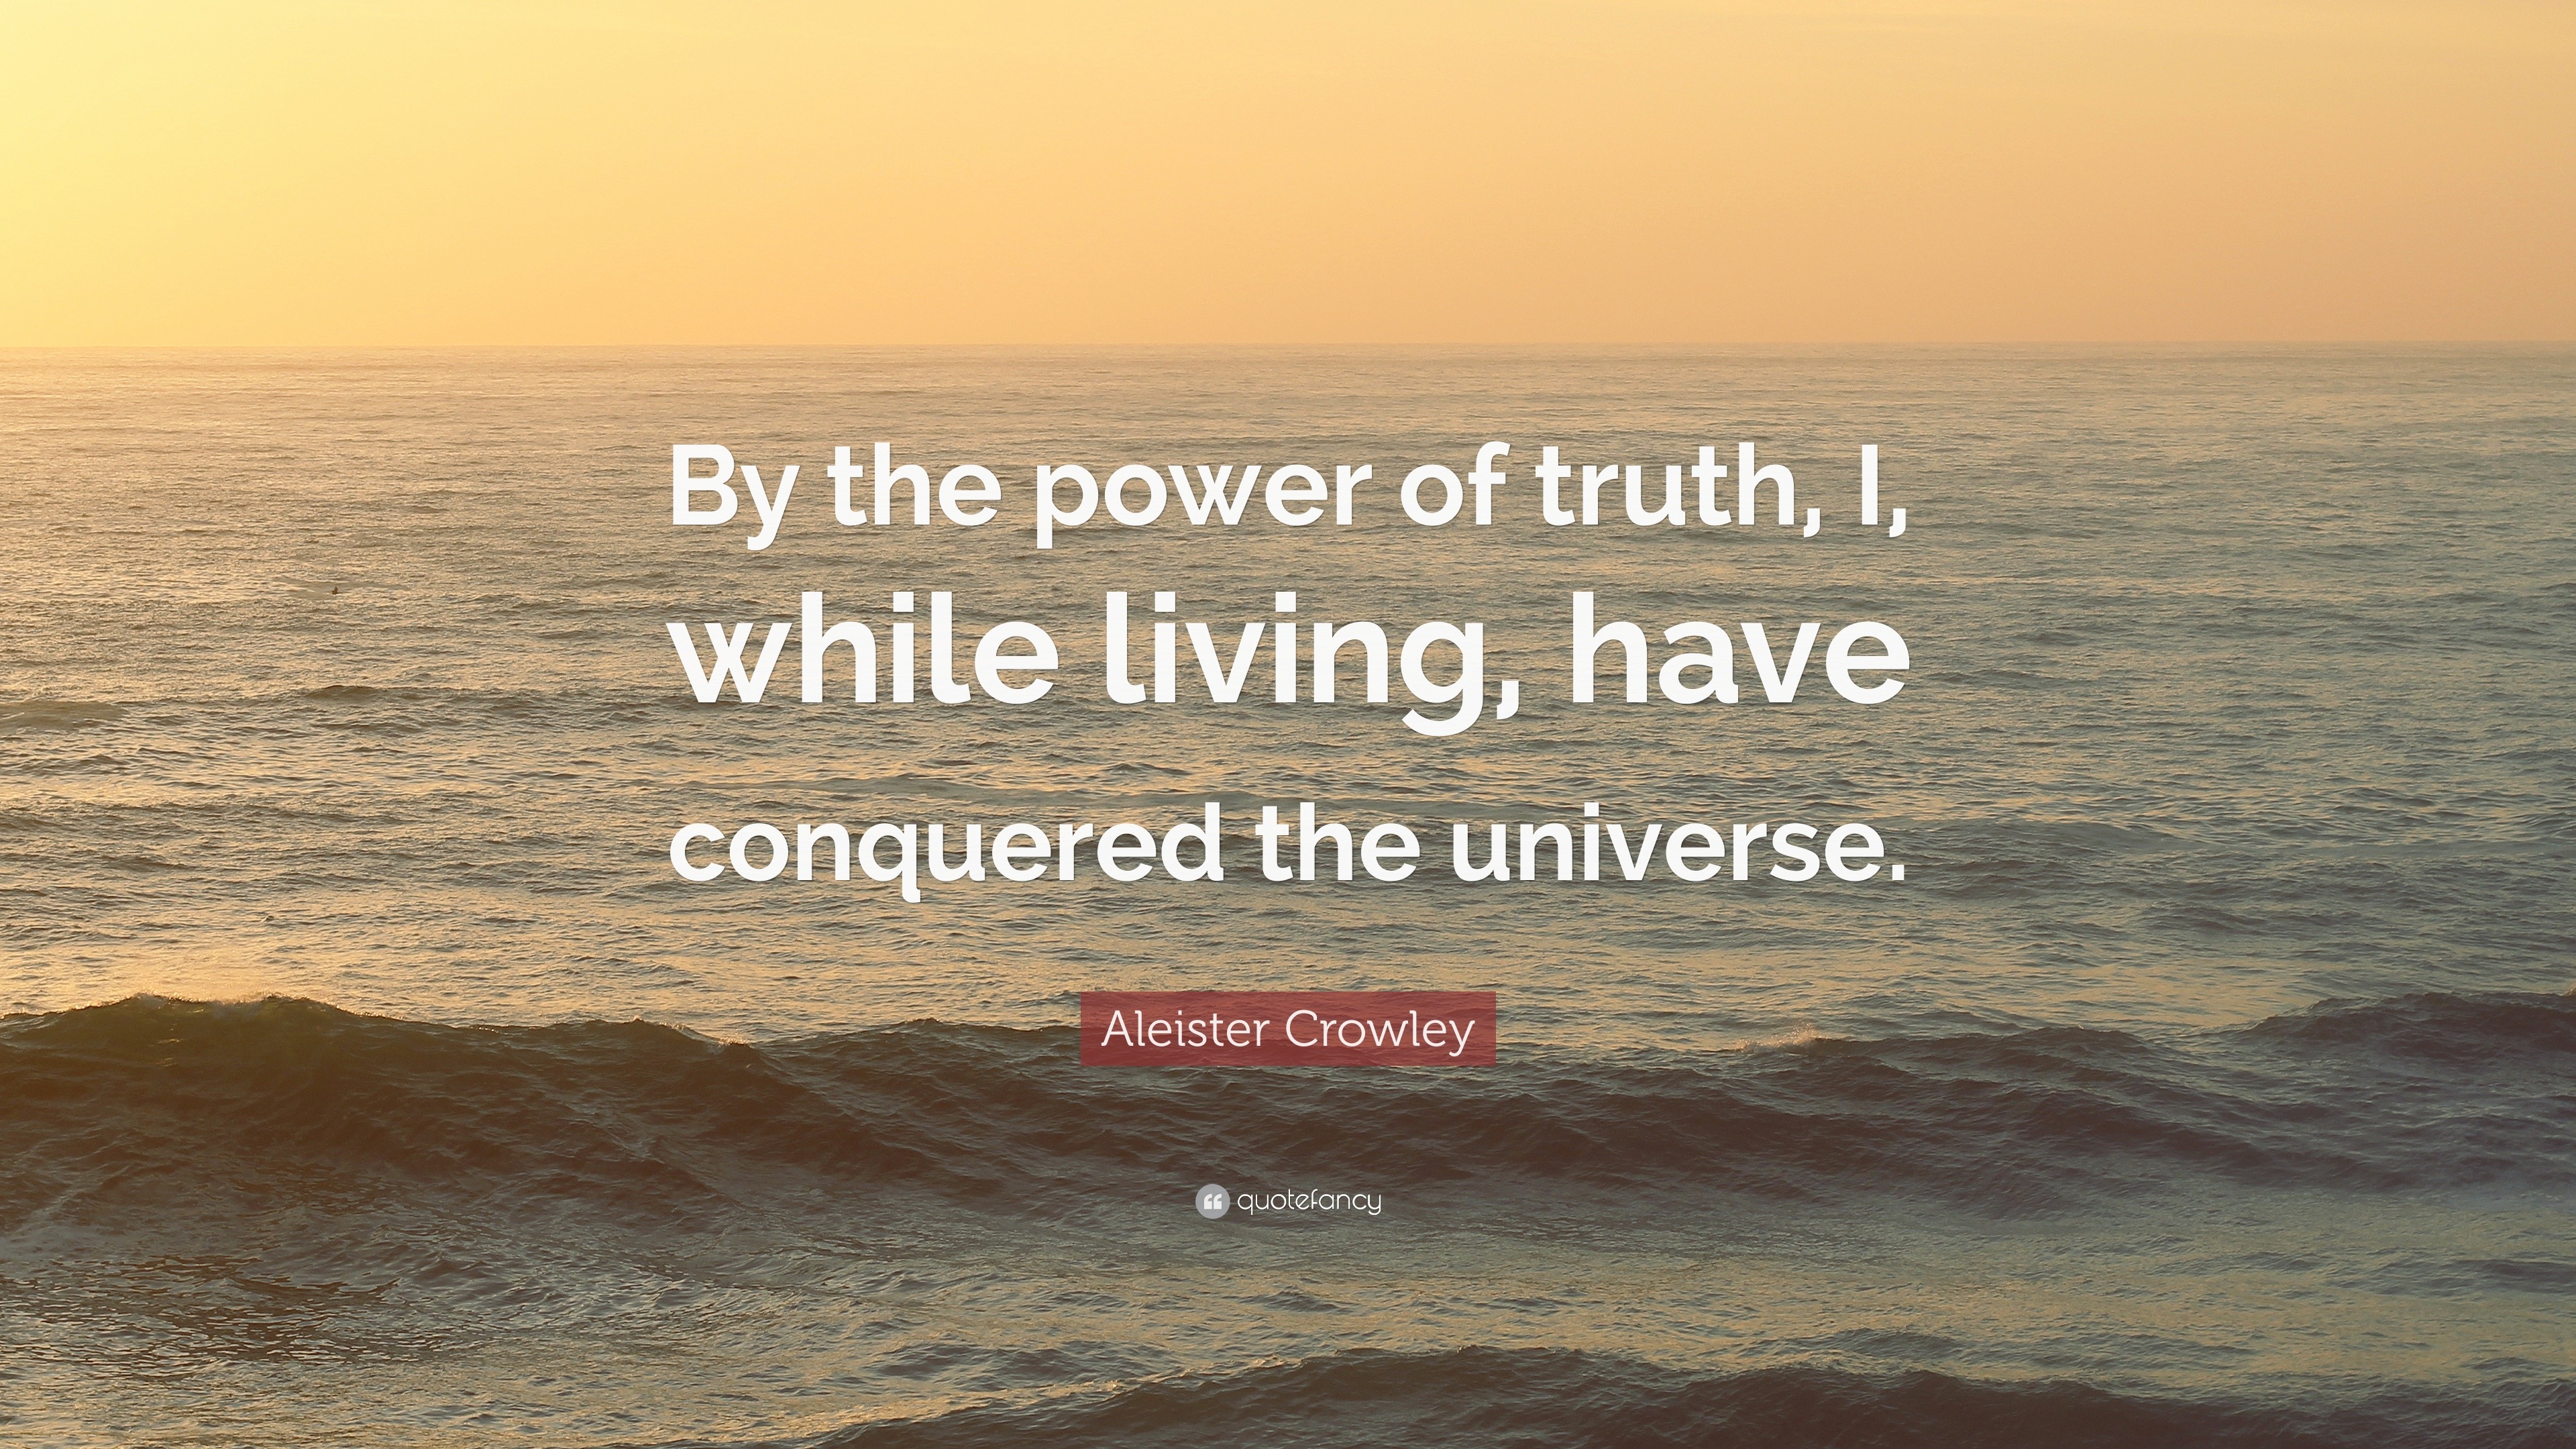 Aleister Crowley Quote “By the power of truth, I, while living, have